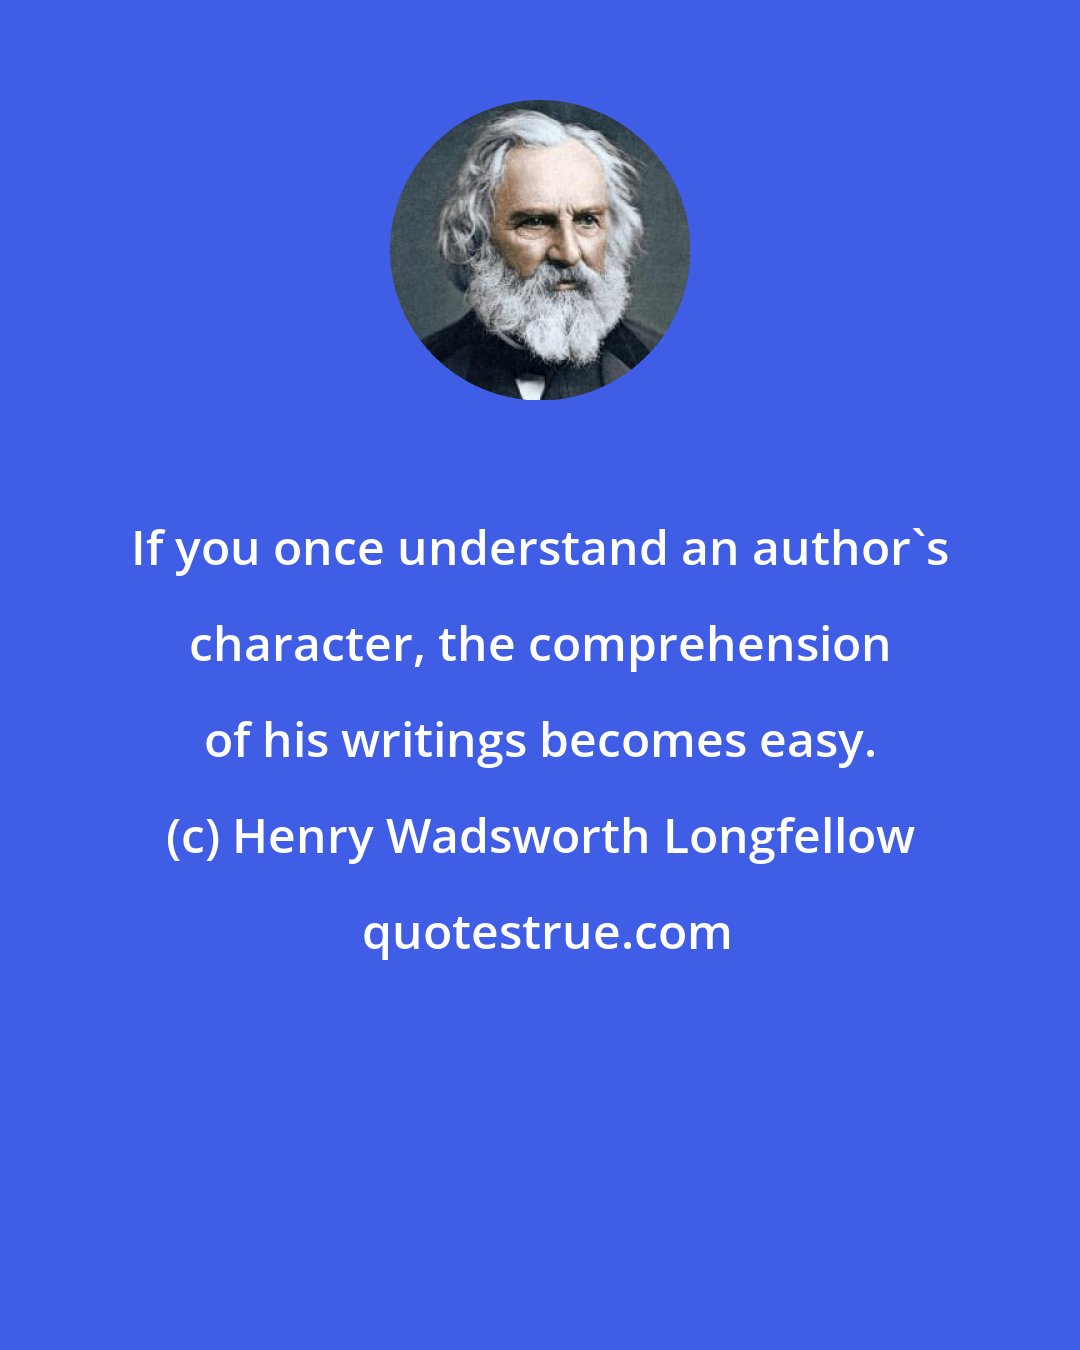 Henry Wadsworth Longfellow: If you once understand an author's character, the comprehension of his writings becomes easy.